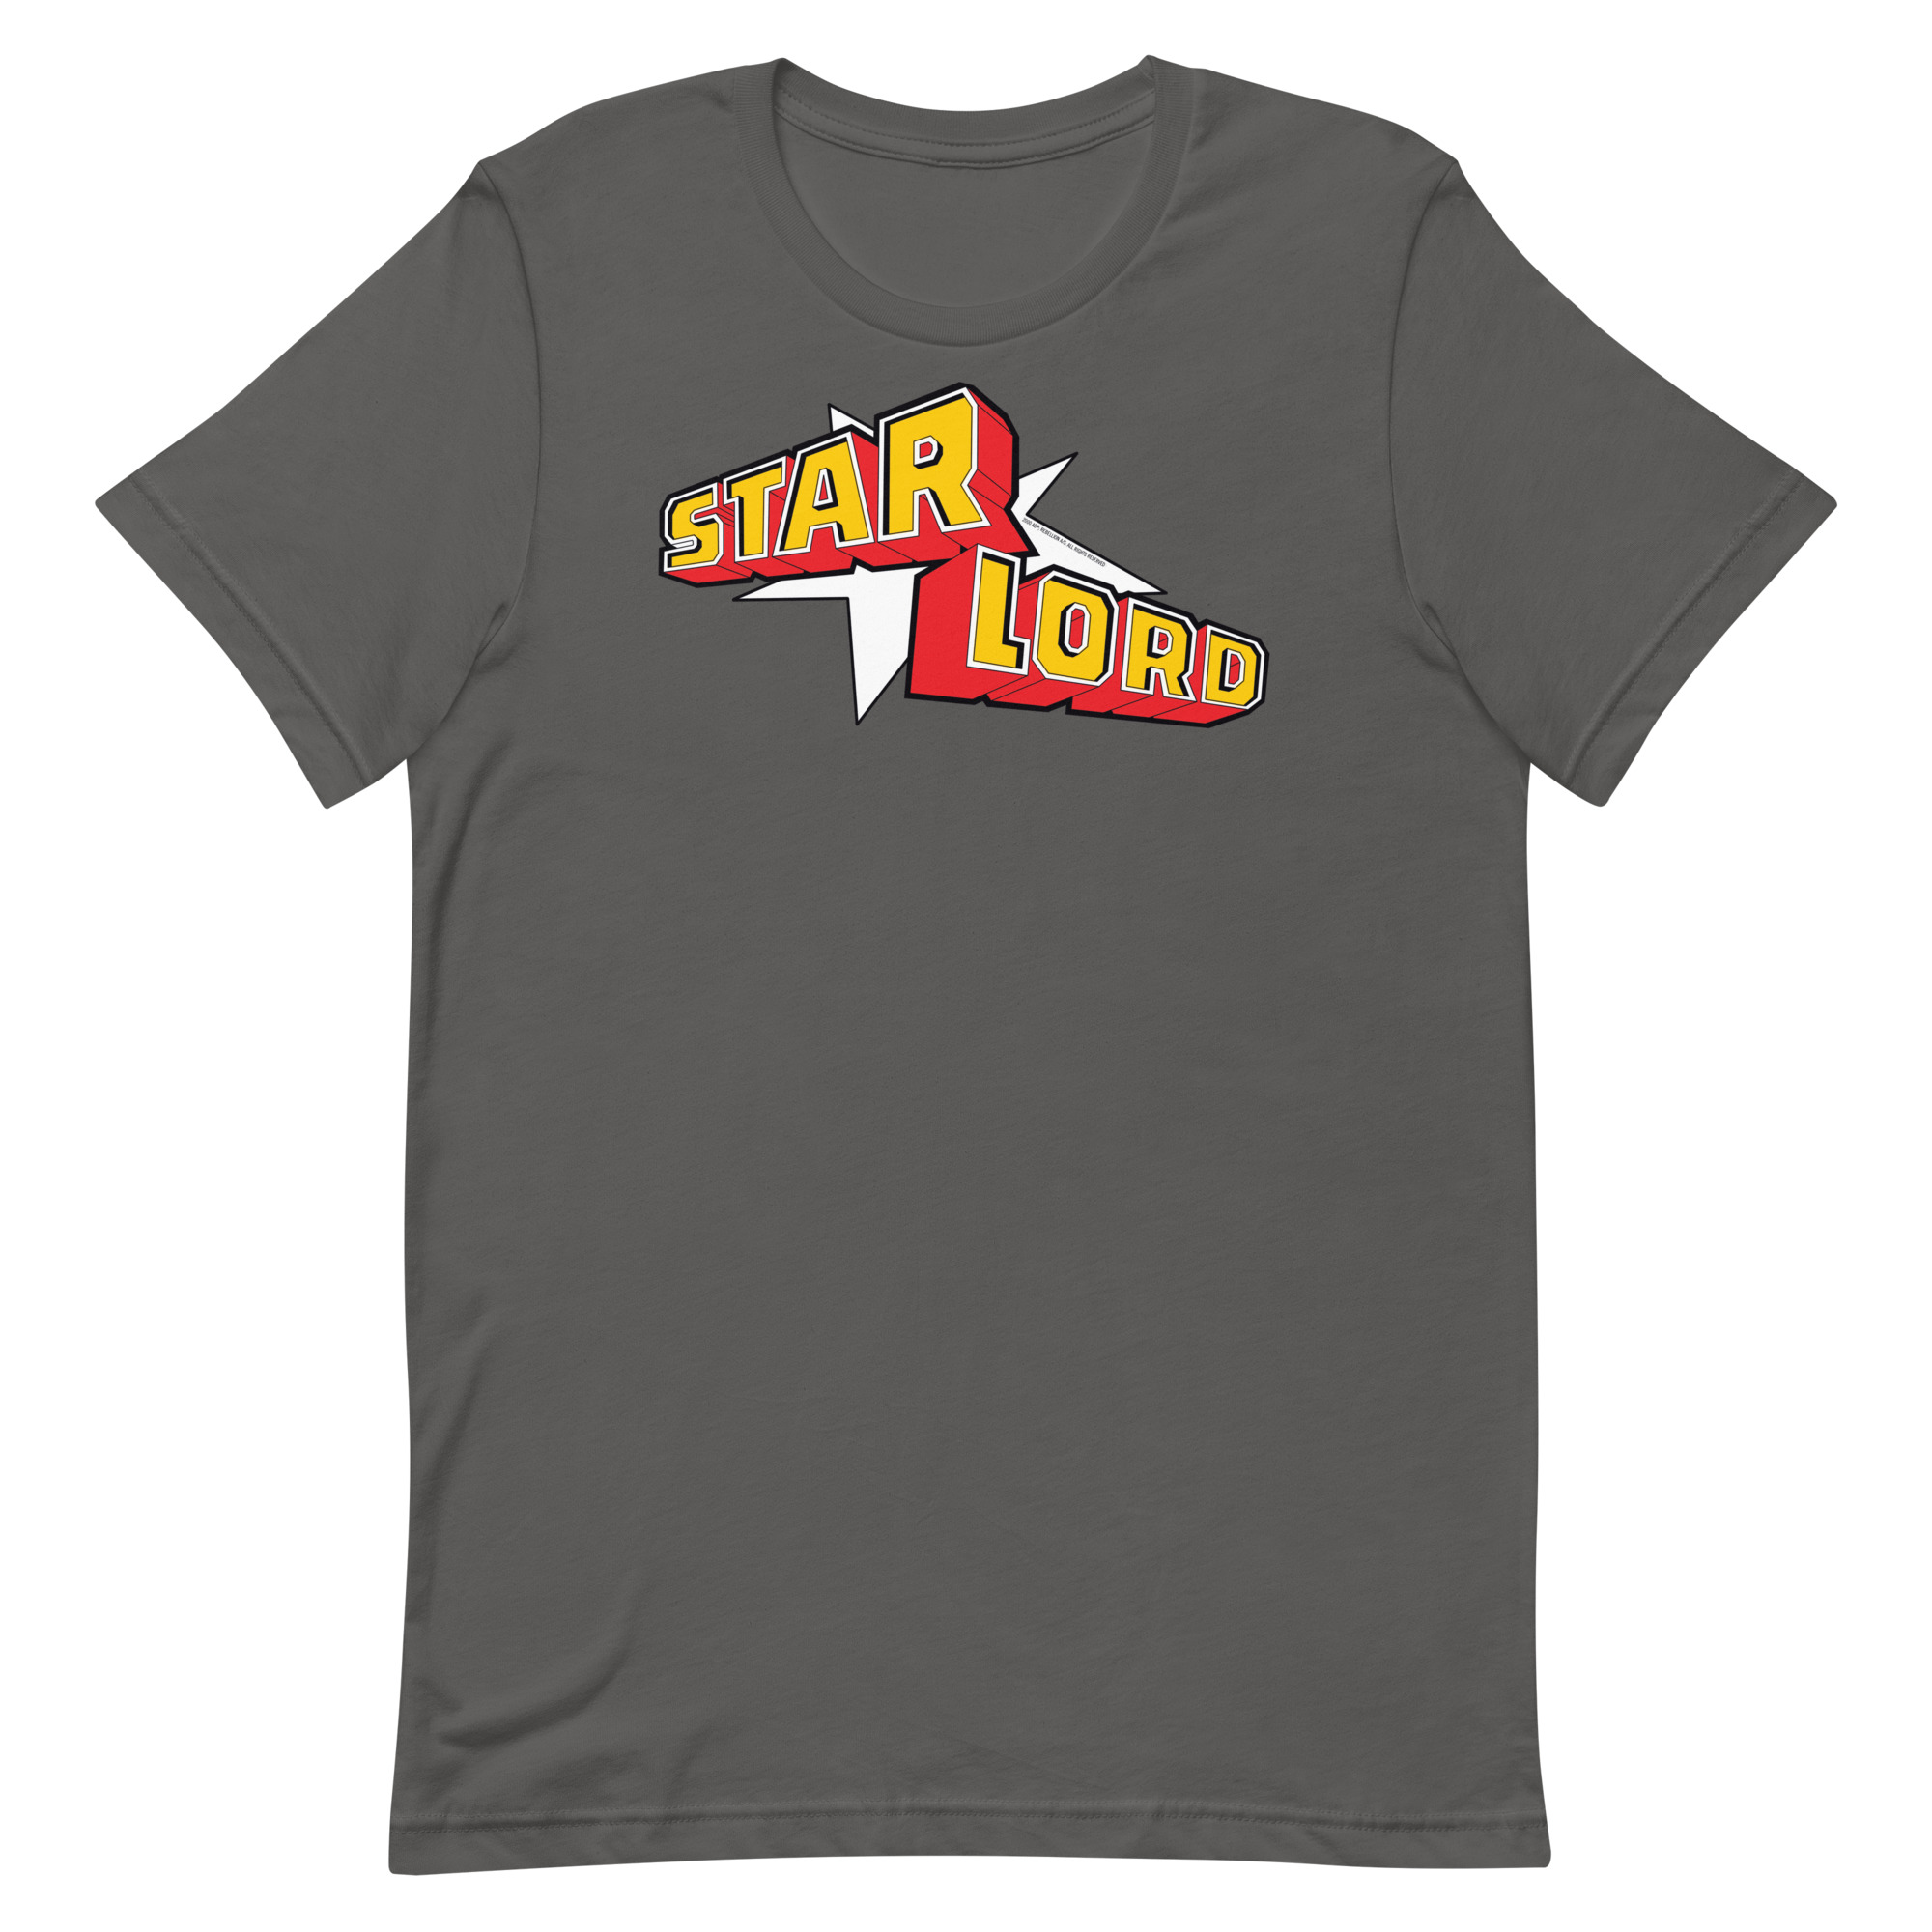 Image of a Asphalt coloured Star Lord t-shirt featuring a large Star Lord logo in the middle